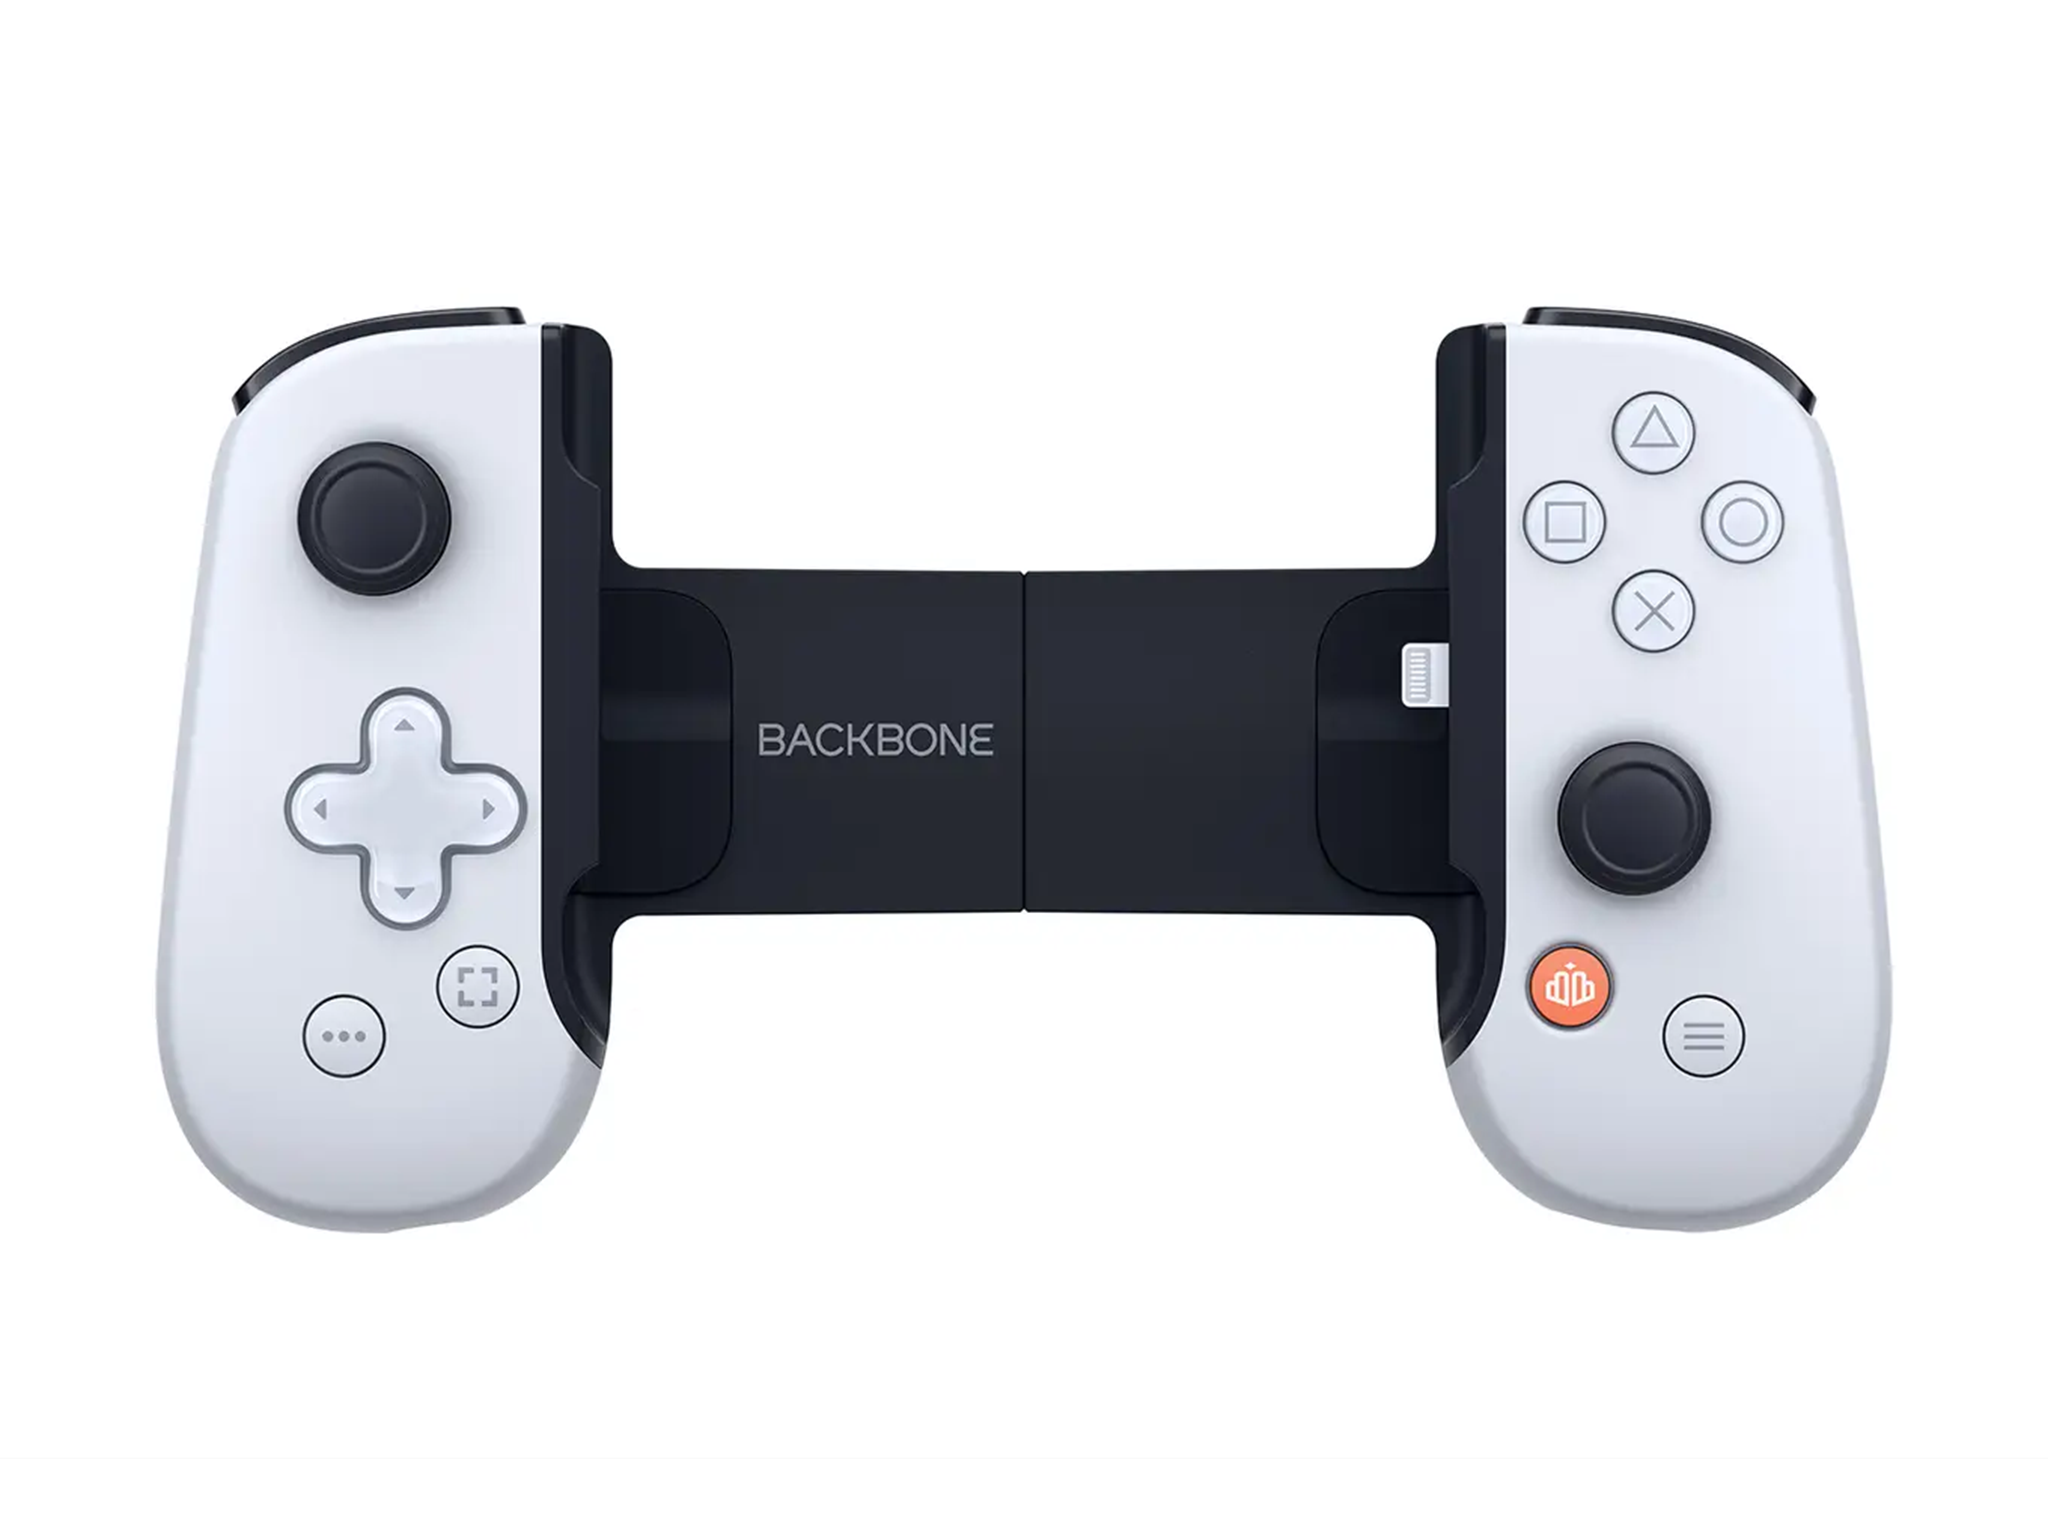 This officially licensed Playstation iPhone controller is the 